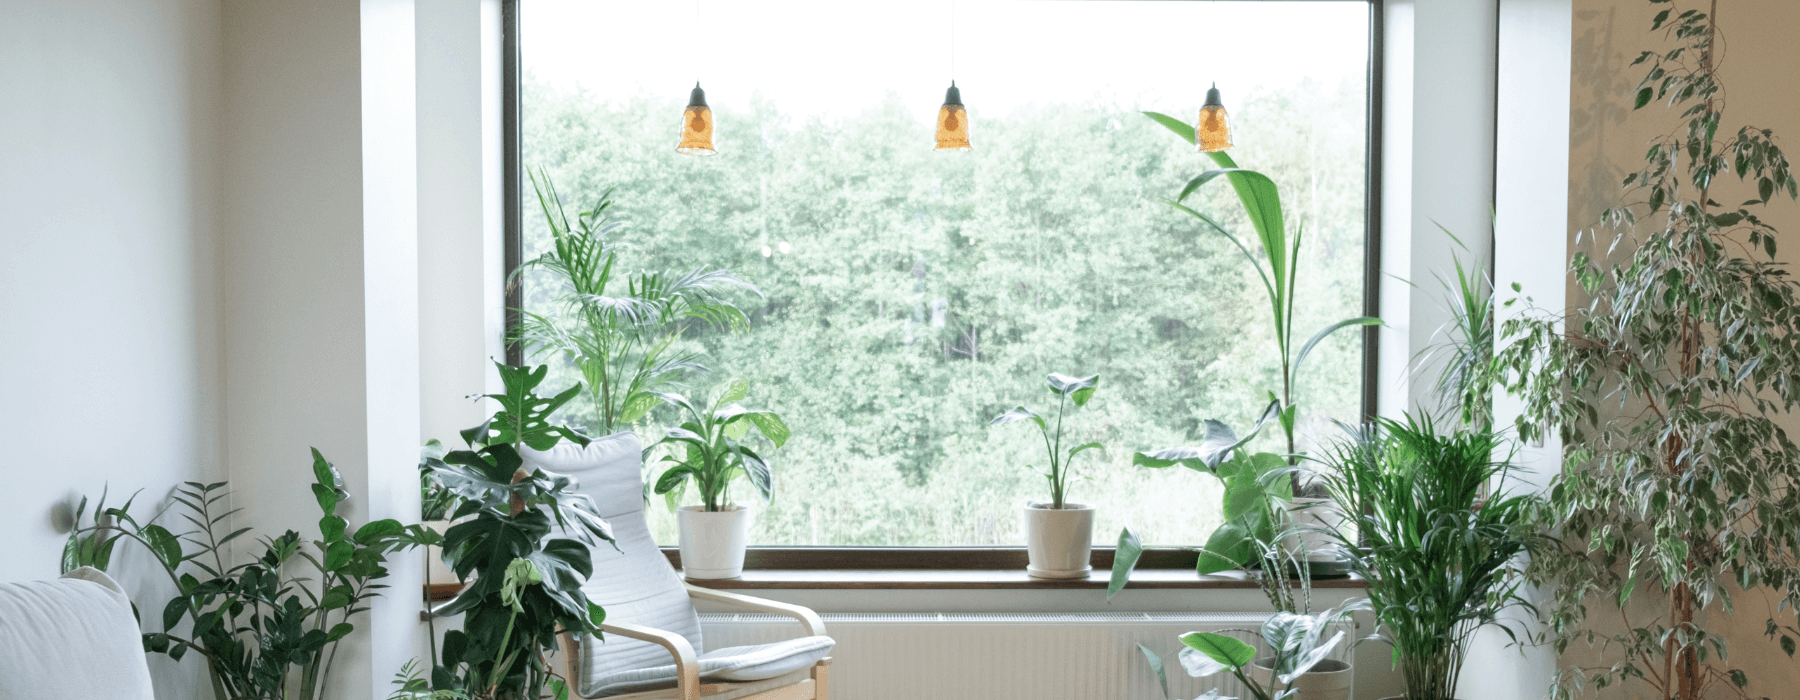 Cozy indoor space with an armchair and a variety of houseplants by a large window overlooking green trees.